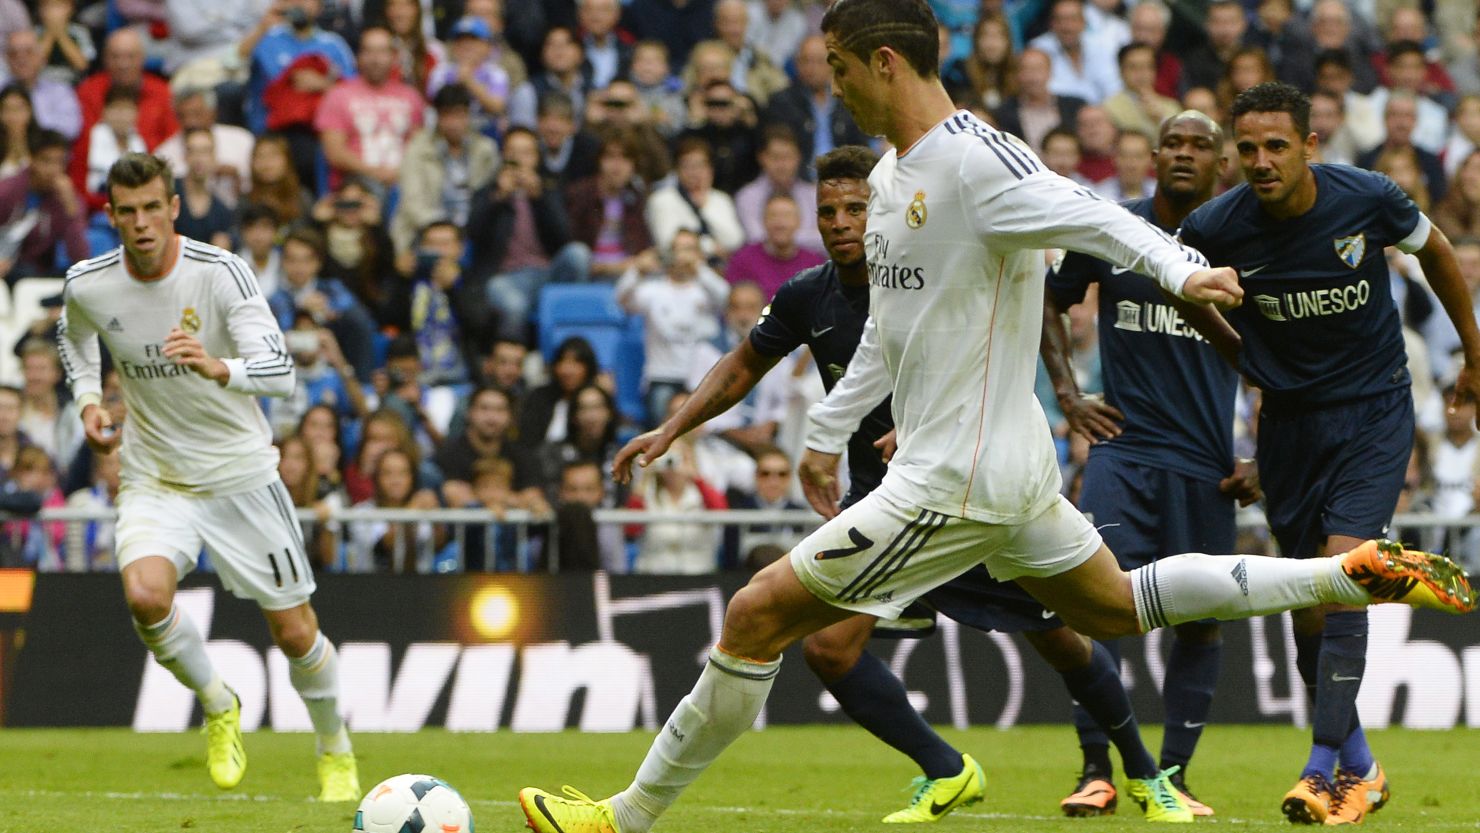 Gareth Bale (left) watches as Cristiano Ronaldo scores Real Madrid's second goal against Malaga from the penalty spot. 